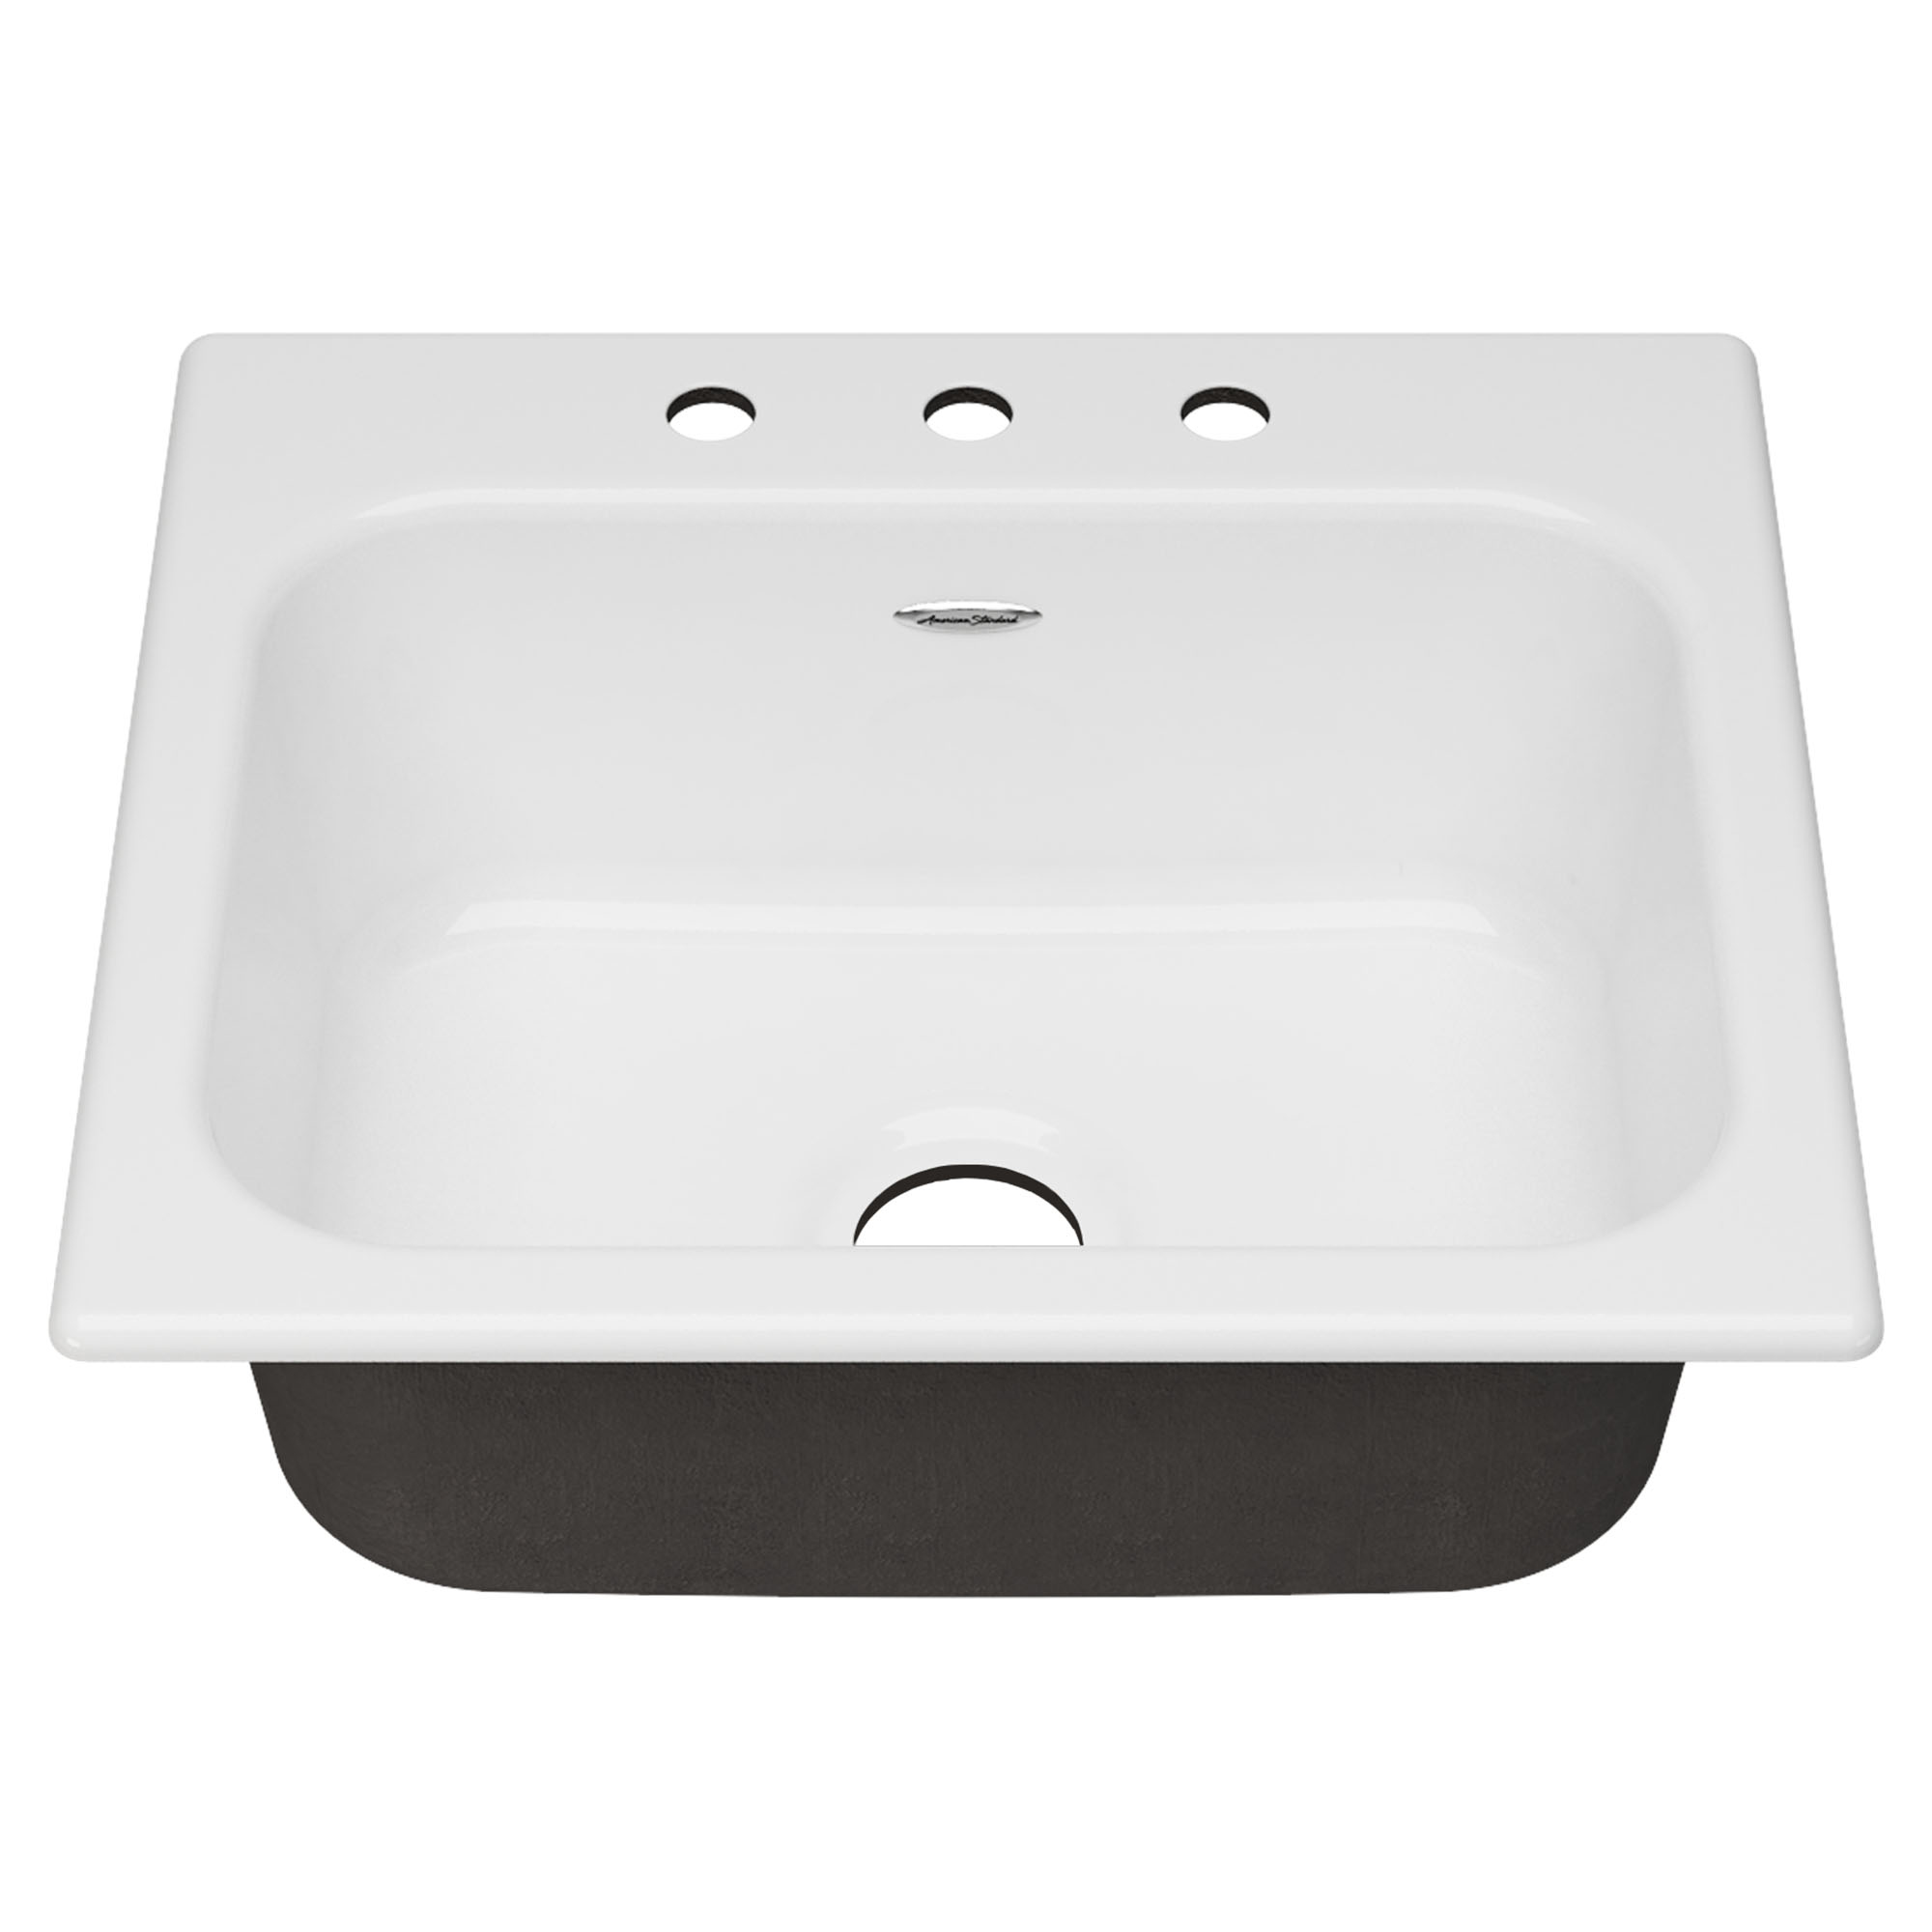 American Standard Quince Drop-in Cast Iron 25 in. 3-Hole Single Bowl Kitchen Sink in Brilliant White - image 1 of 6